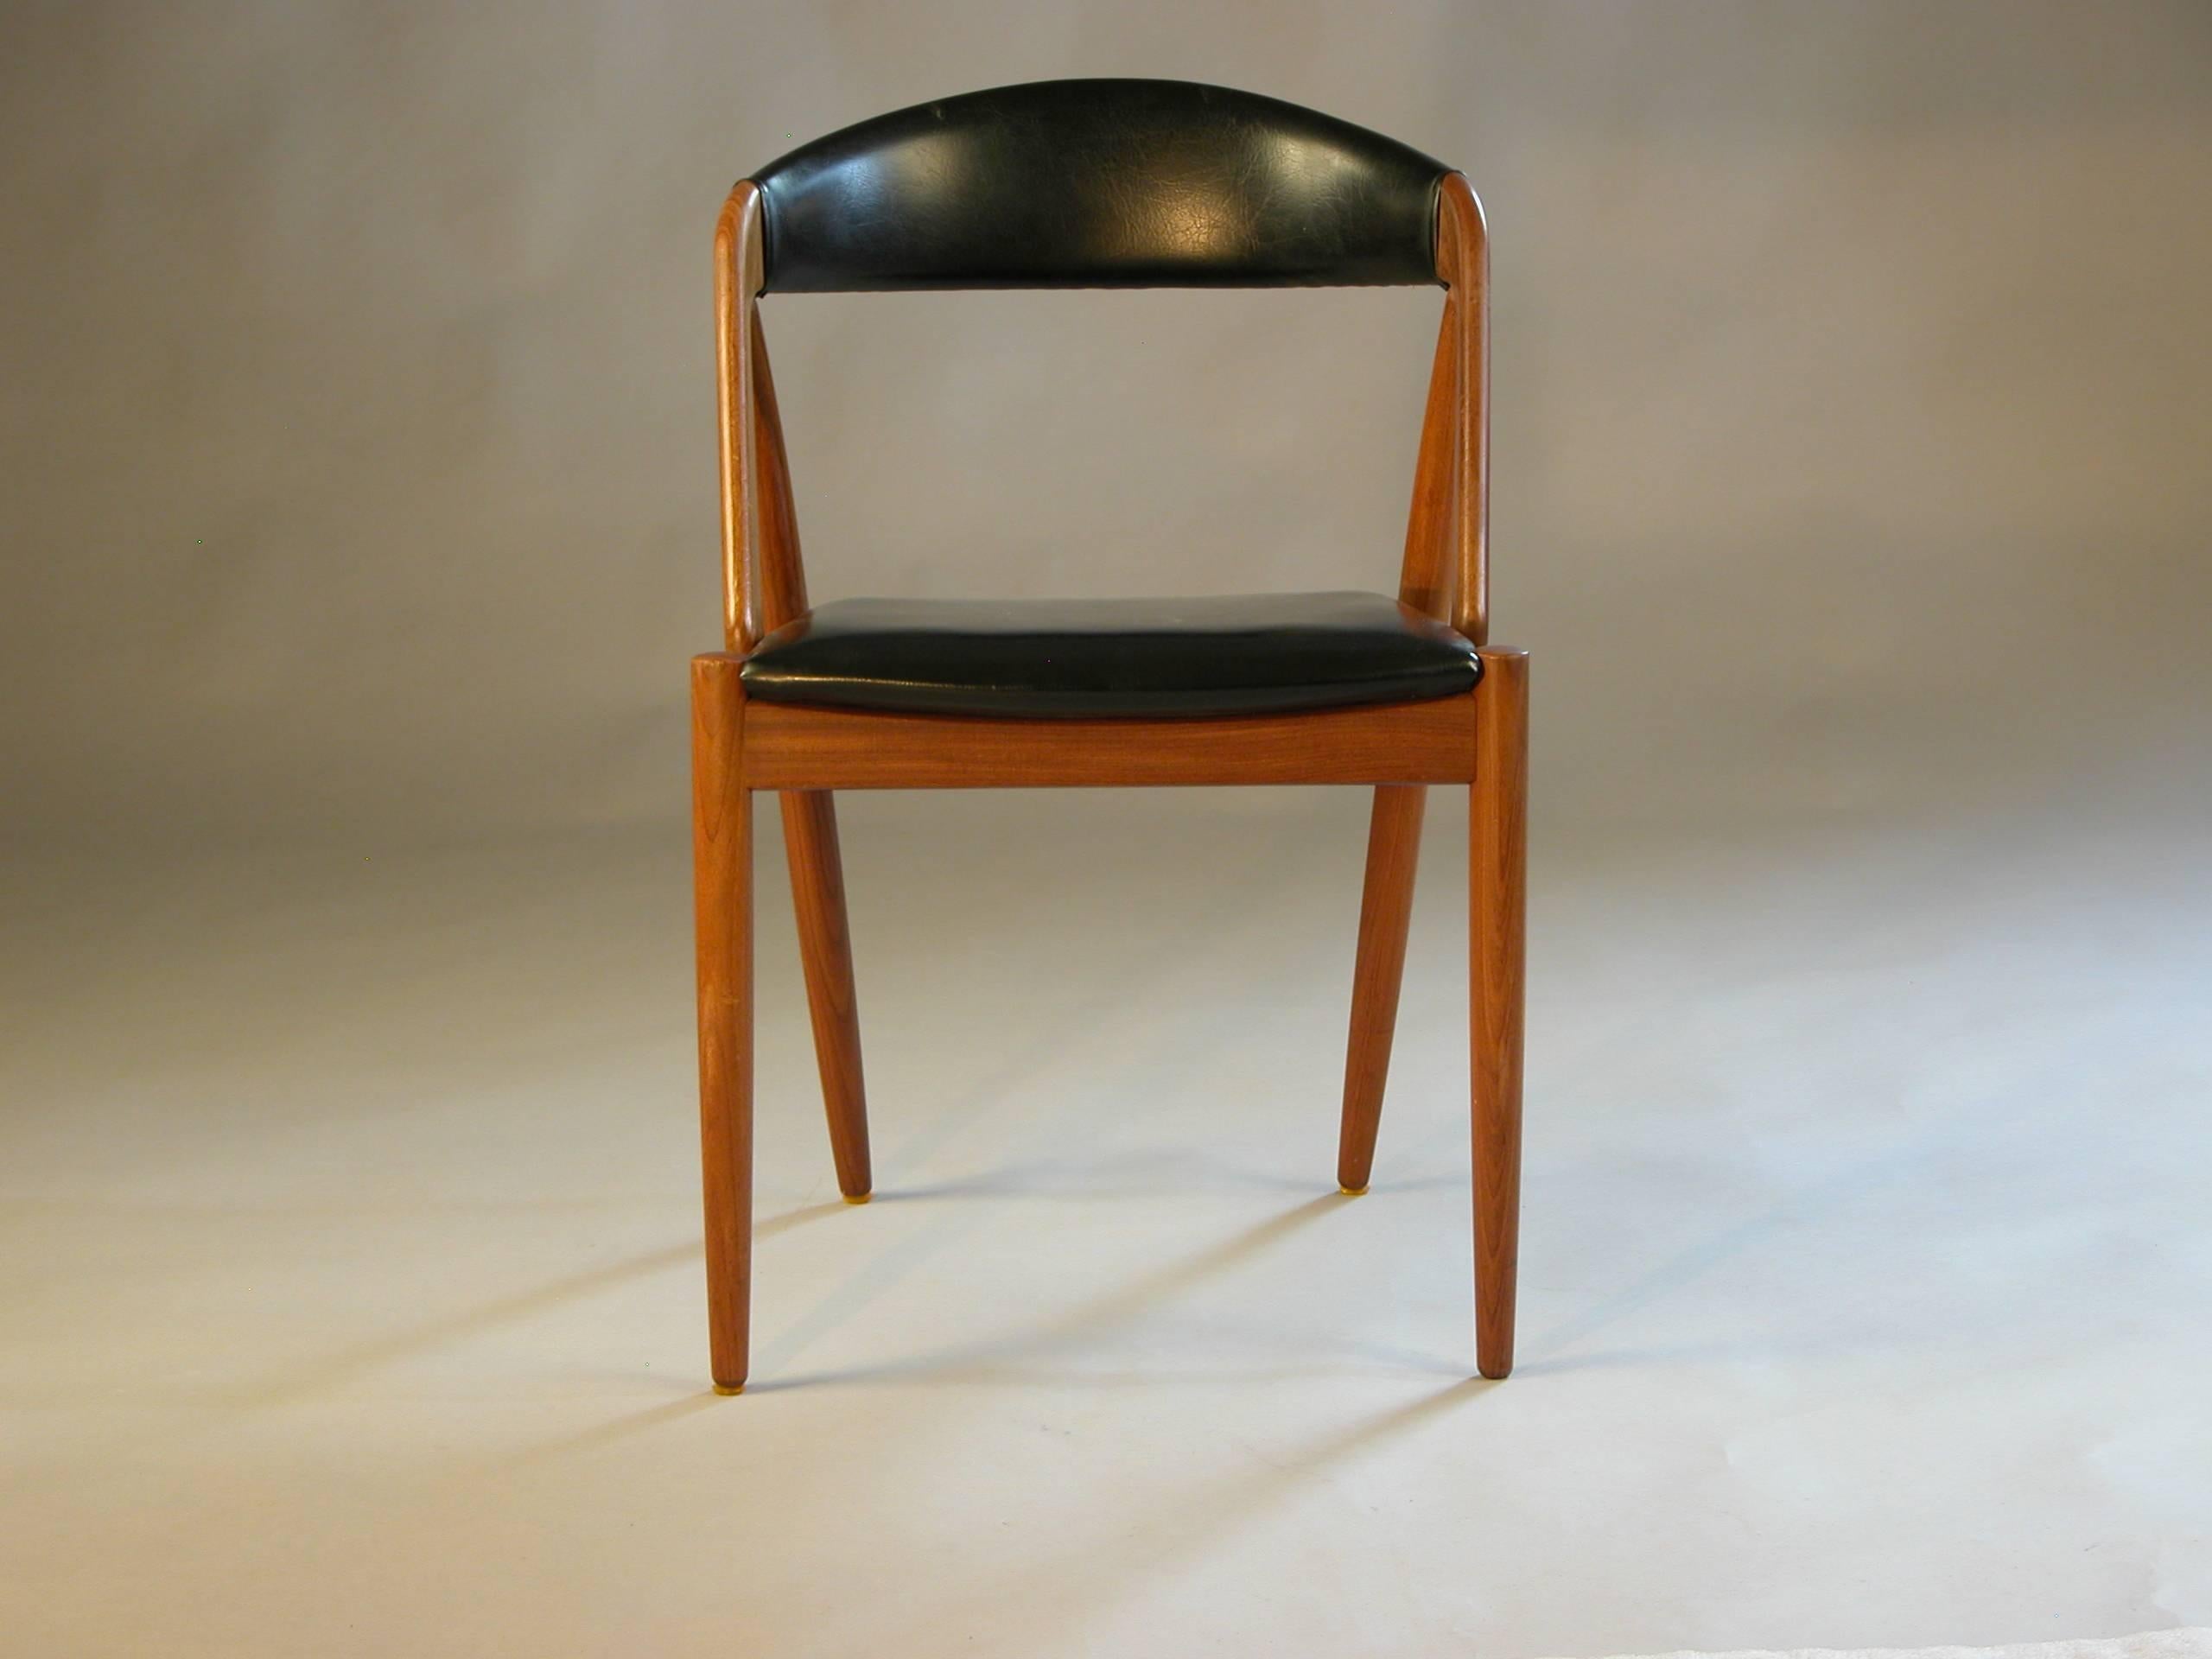 Kai Kristiansens model 31 dining chairs with refinished frames and leatherette upholstery.

The A-frame model 31 chairs were designed by Kai Kristiansen in 1956. The model with its curved, straight and oblique lines and comfortable seats are one of